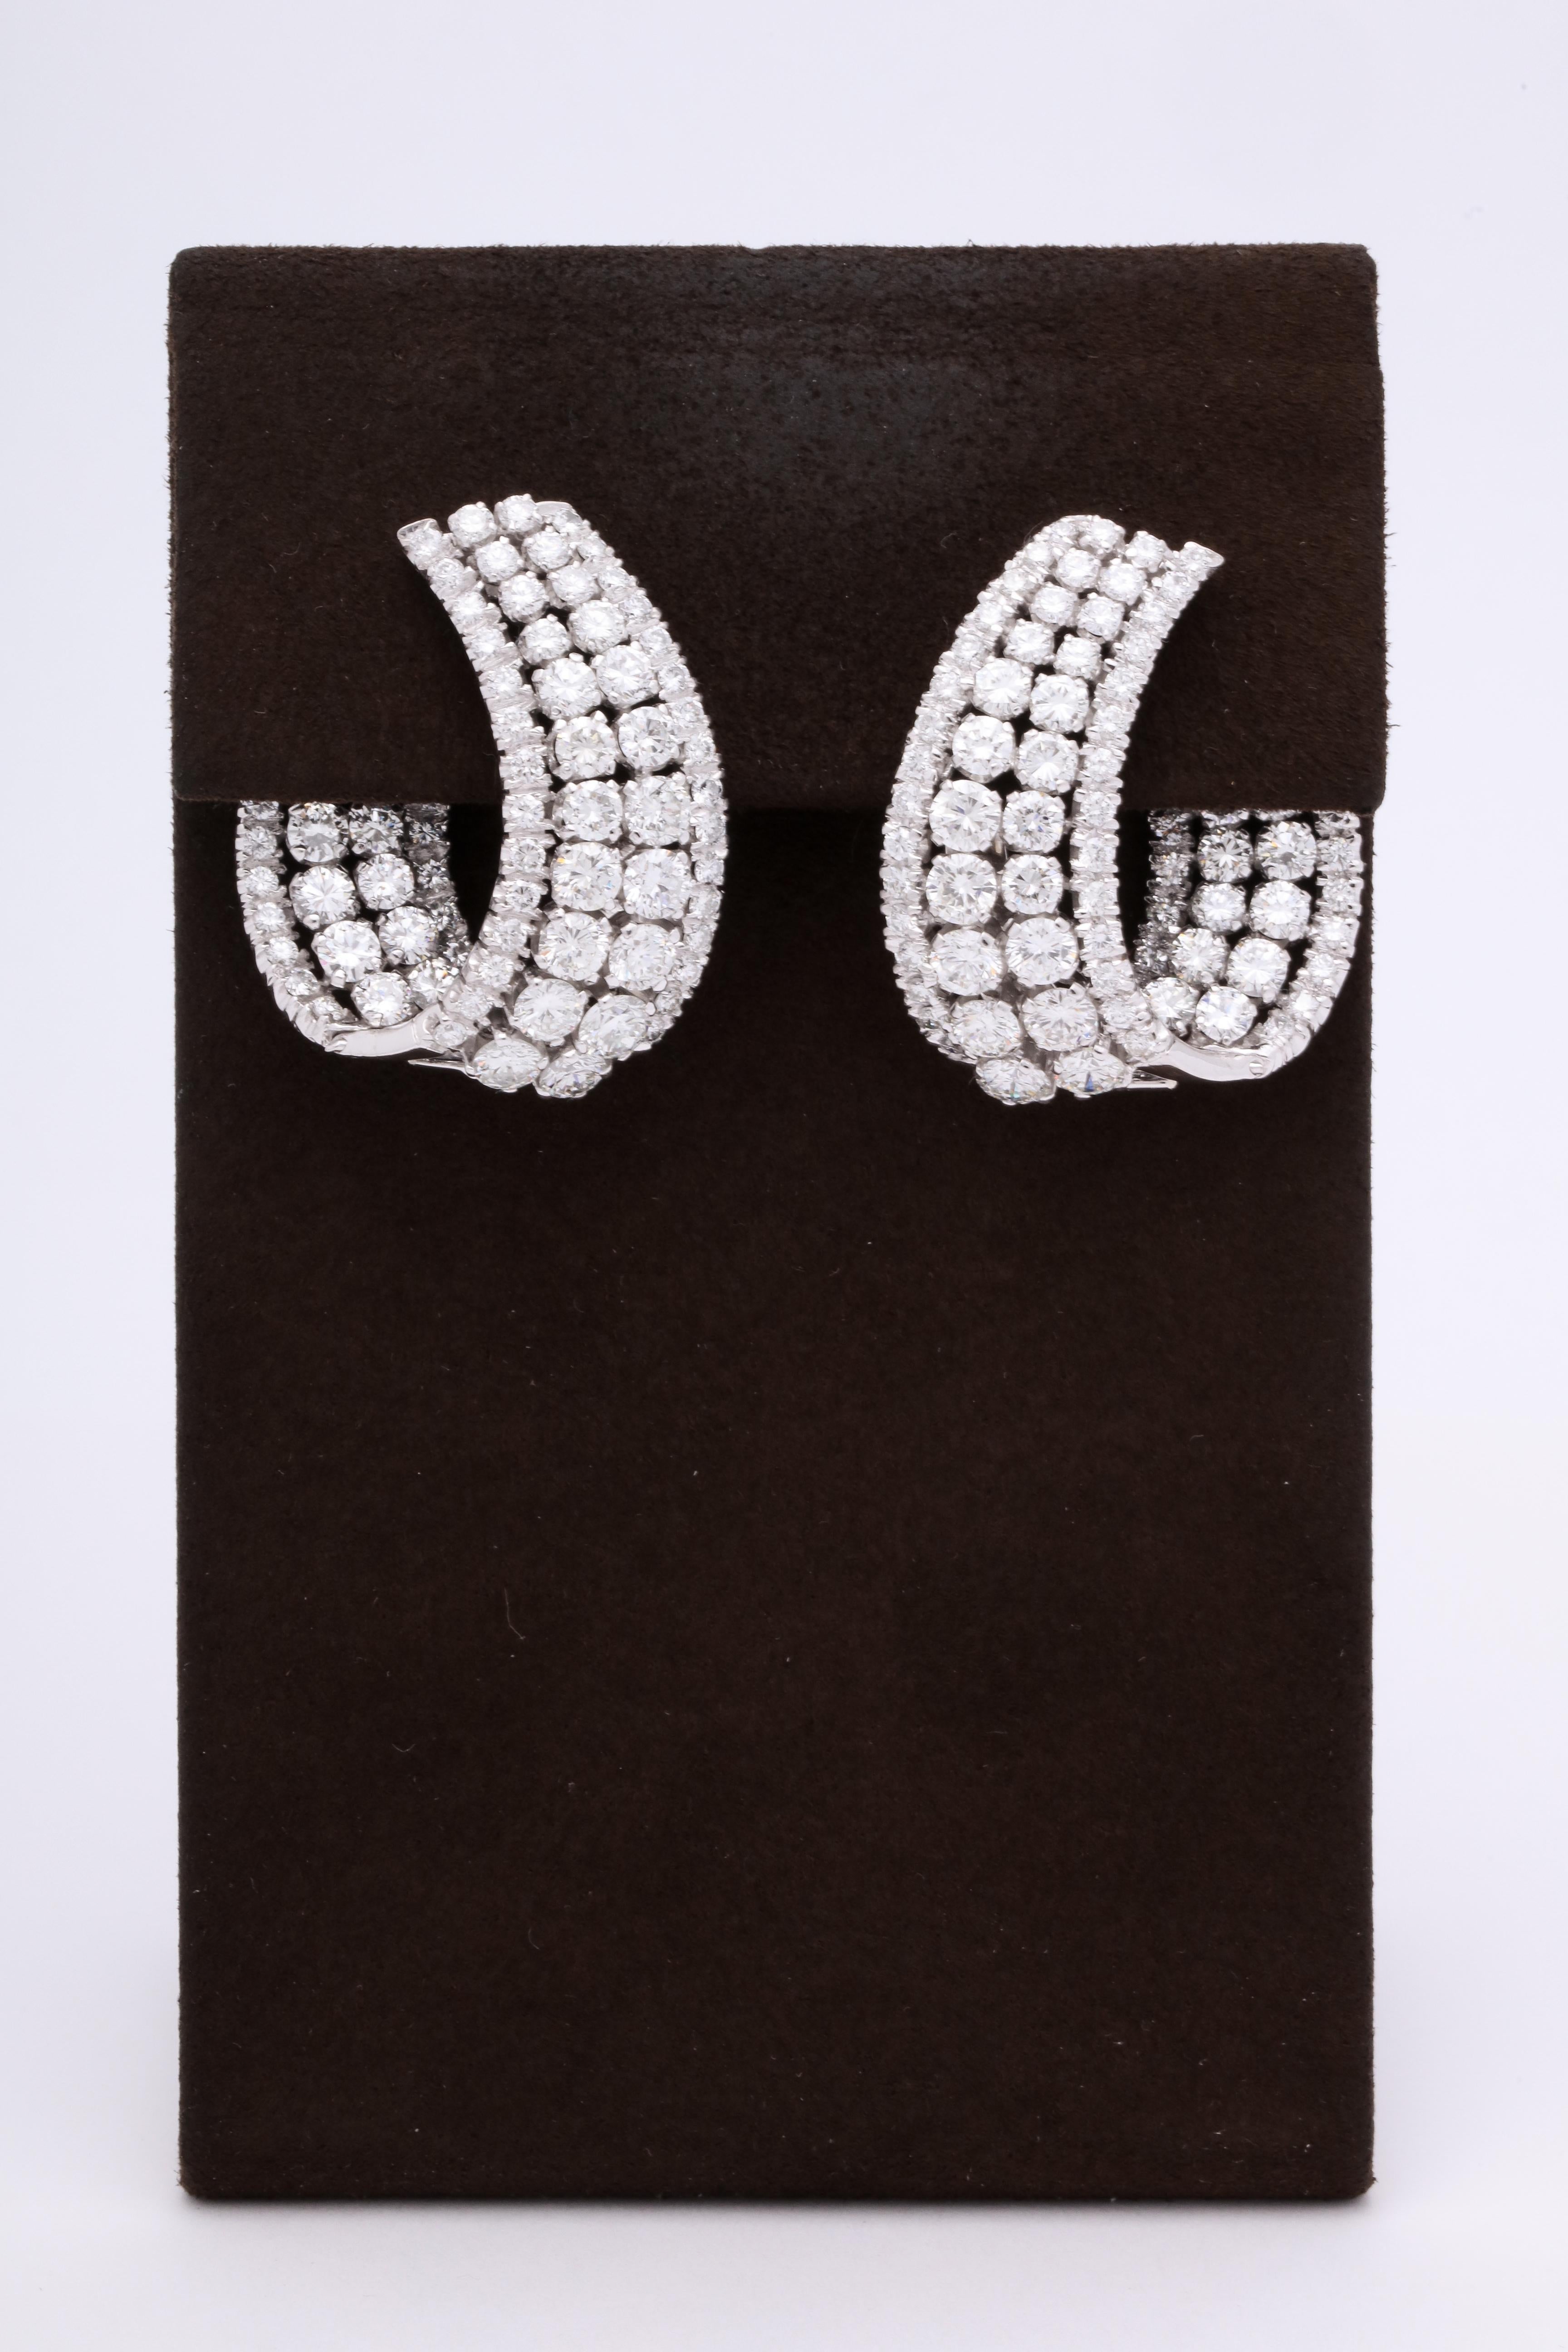 
A STUNNING pair of diamond earrings!

21.02 carats of white round brilliant cut diamonds set in white gold. 

The earrings measure approximately 1.4 inches long and 1.20 inches wide. 

Inspired by the worlds most famous jewelry designers, similar